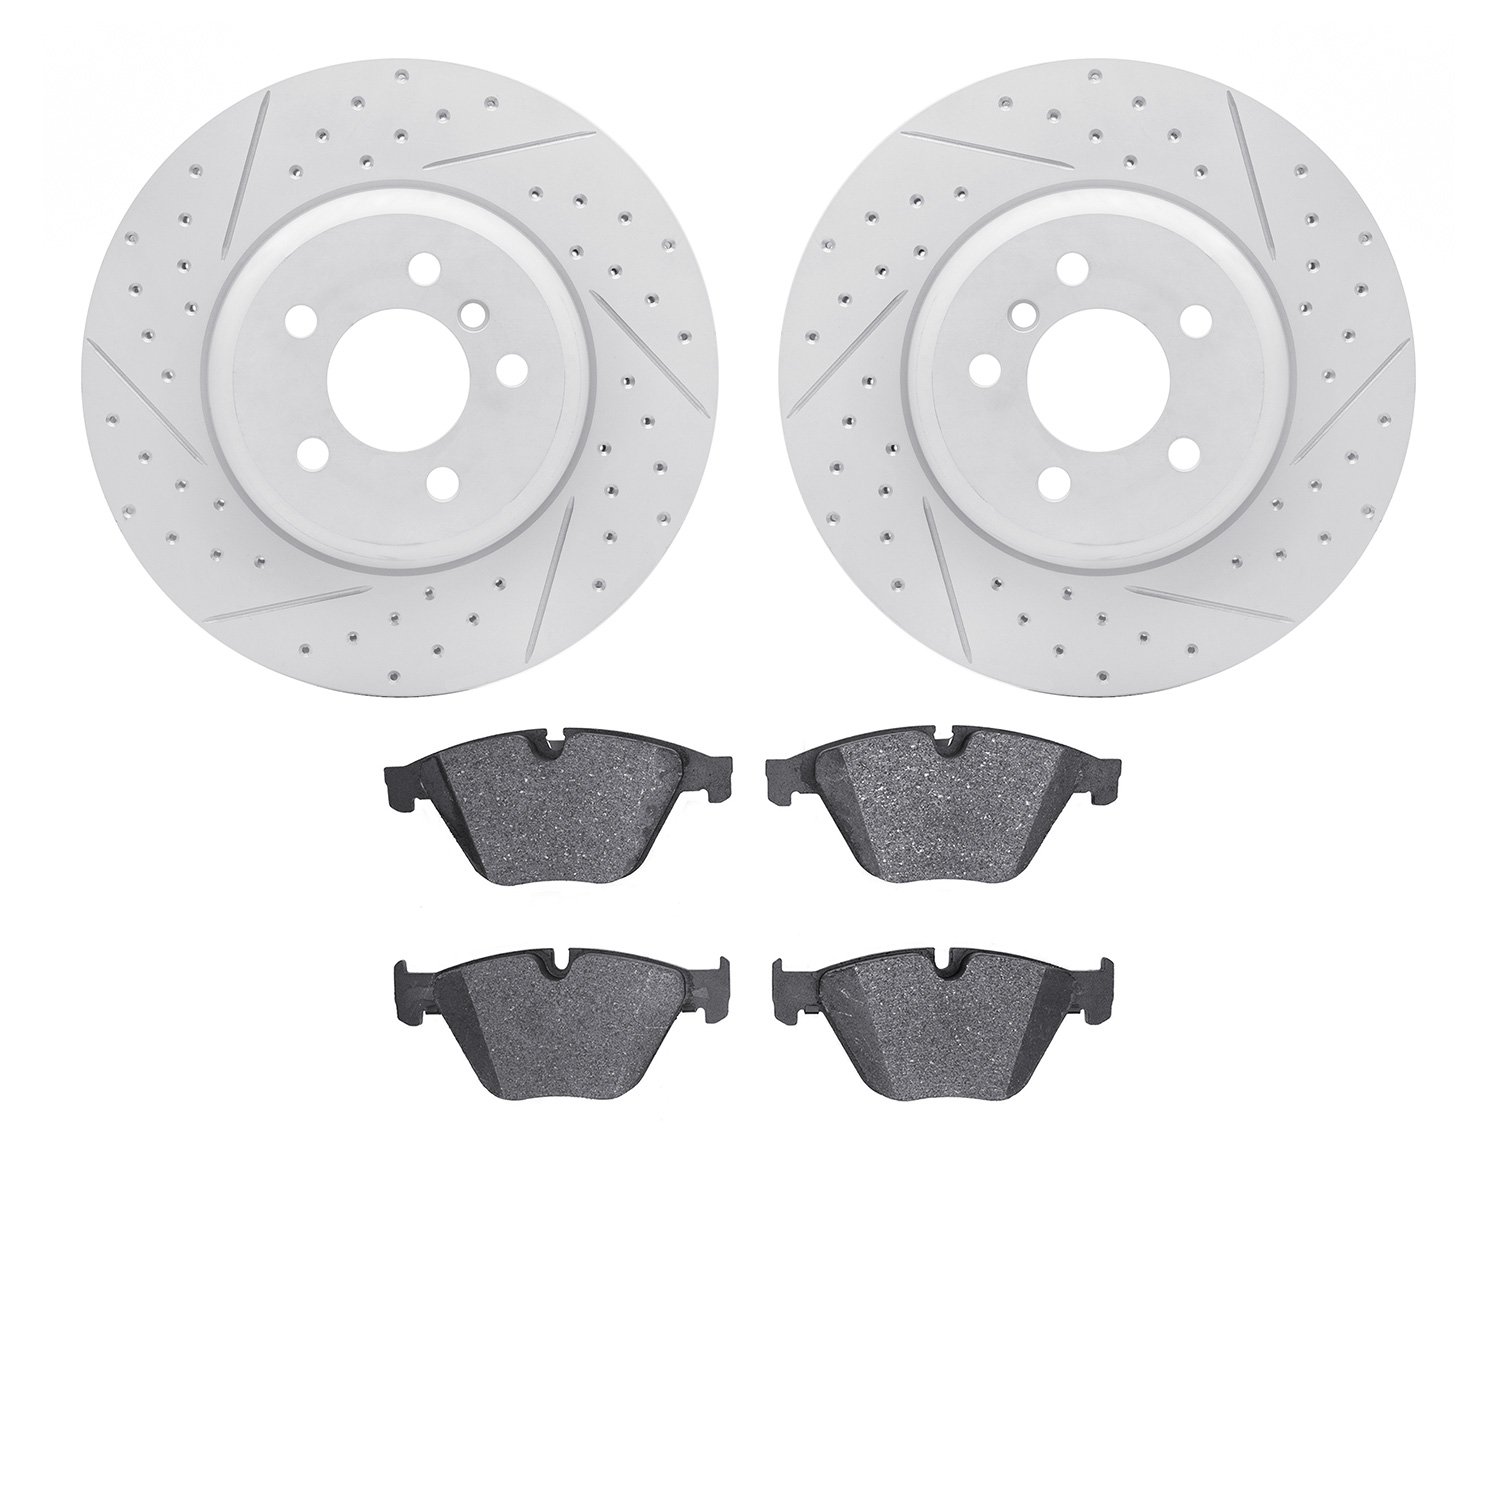 2502-31072 Geoperformance Drilled/Slotted Rotors w/5000 Advanced Brake Pads Kit, 2012-2019 BMW, Position: Front